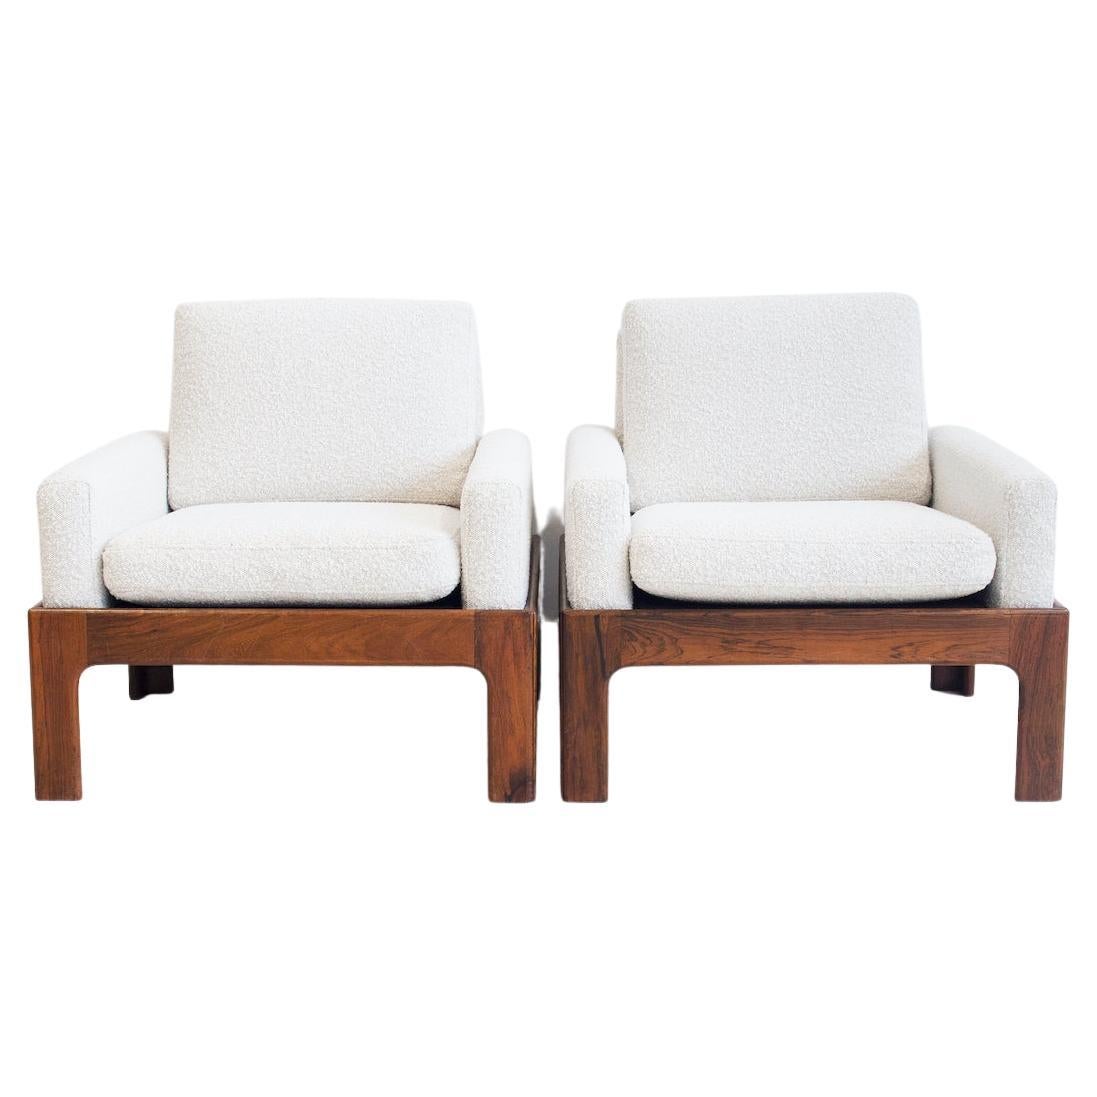 Pair of Hardwood Armchairs with Bouclé Fabric Upholstery by Eilersen